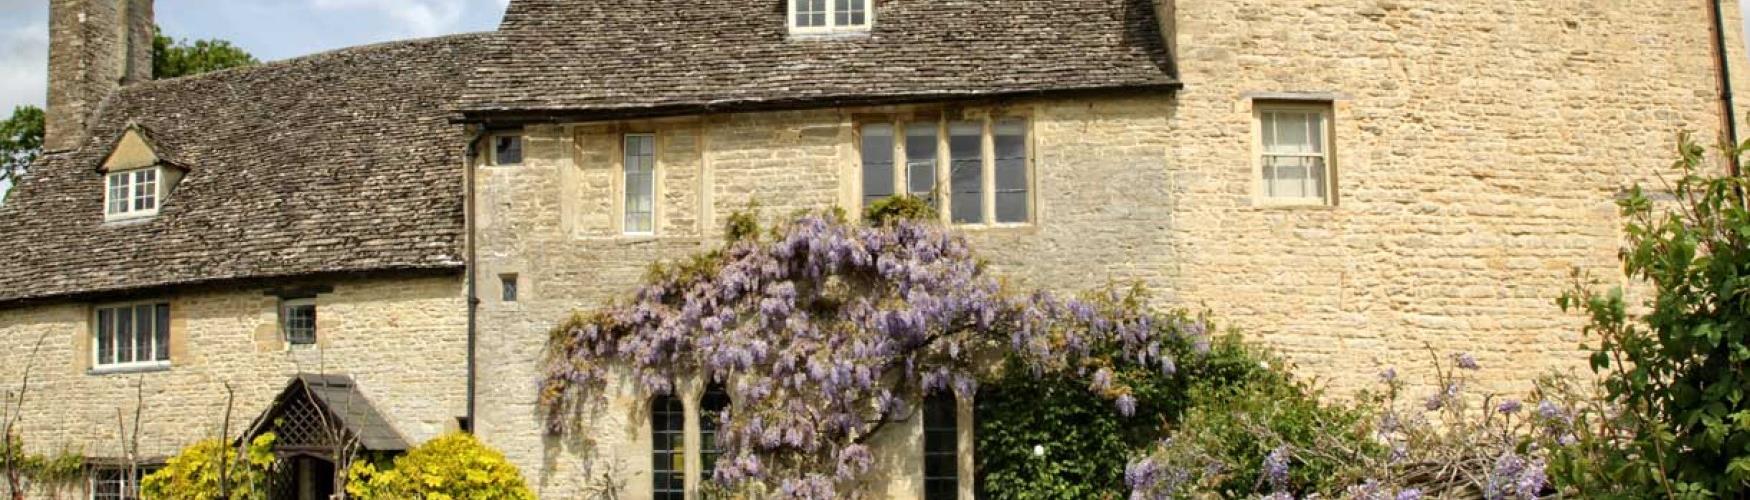 Wisteria covering the manor house at Cogges Manor Farm